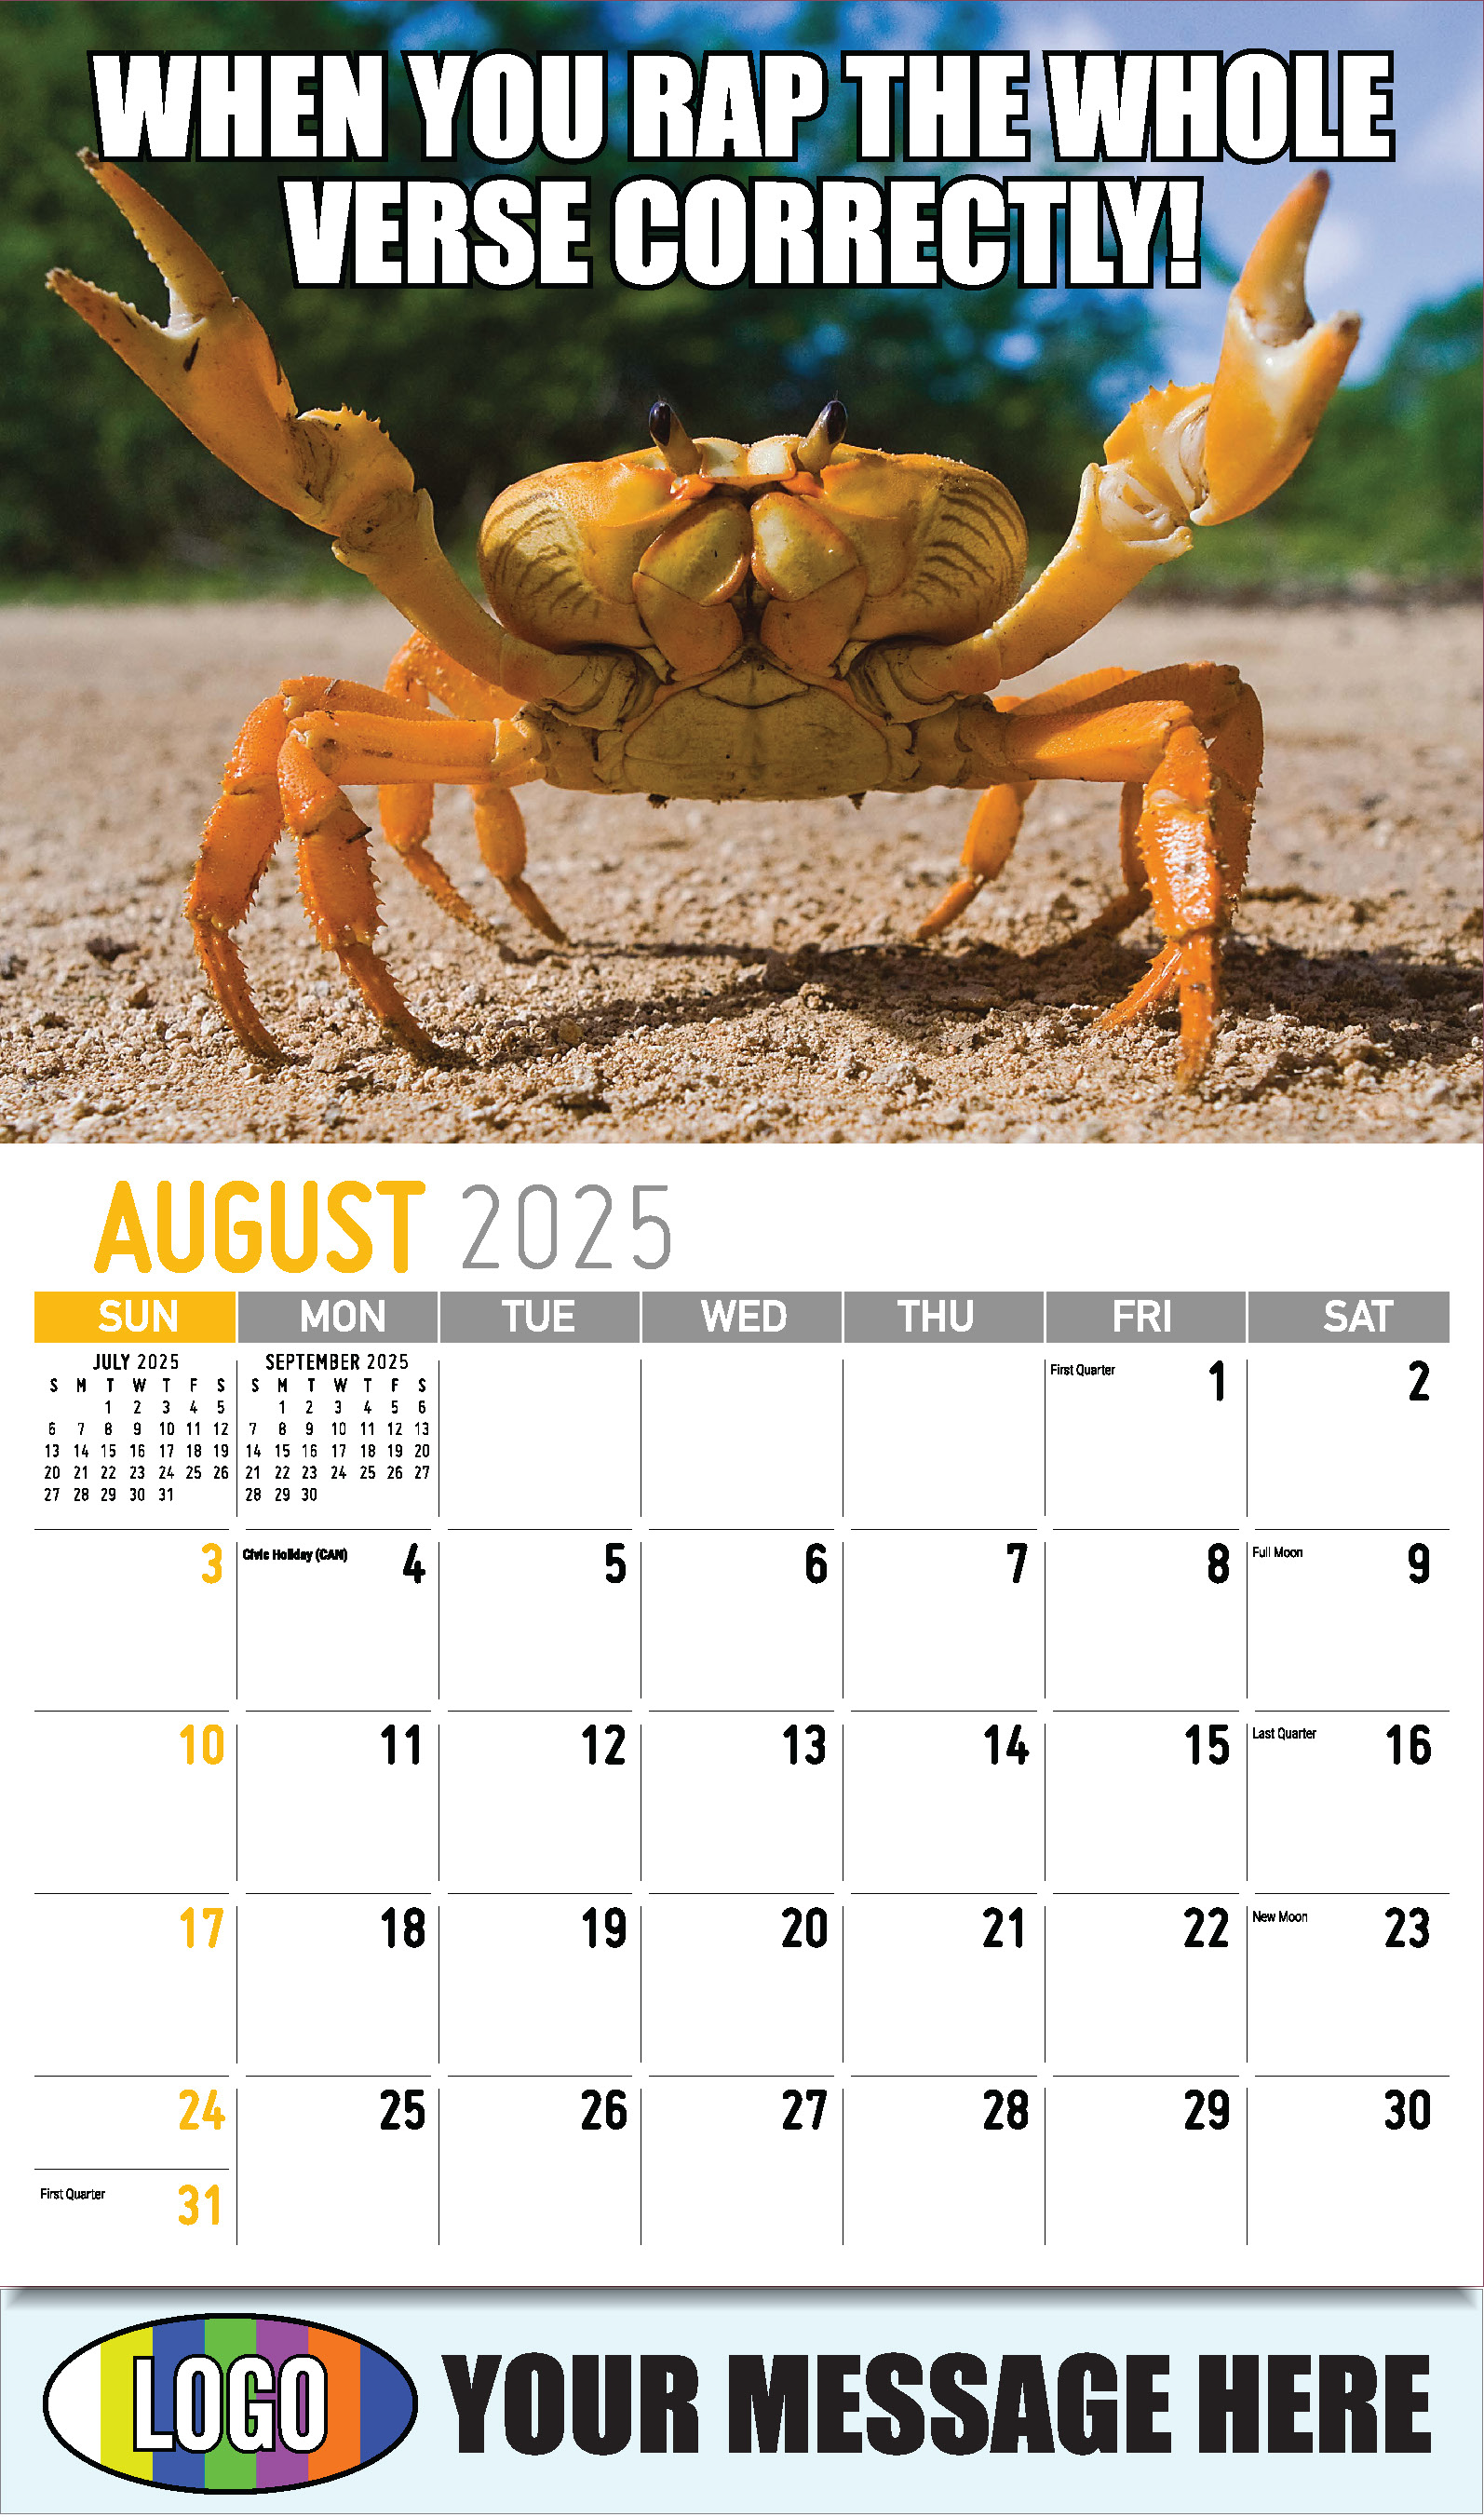 The Memeing of Life 2025 Business Advertising Wall Calendar - August